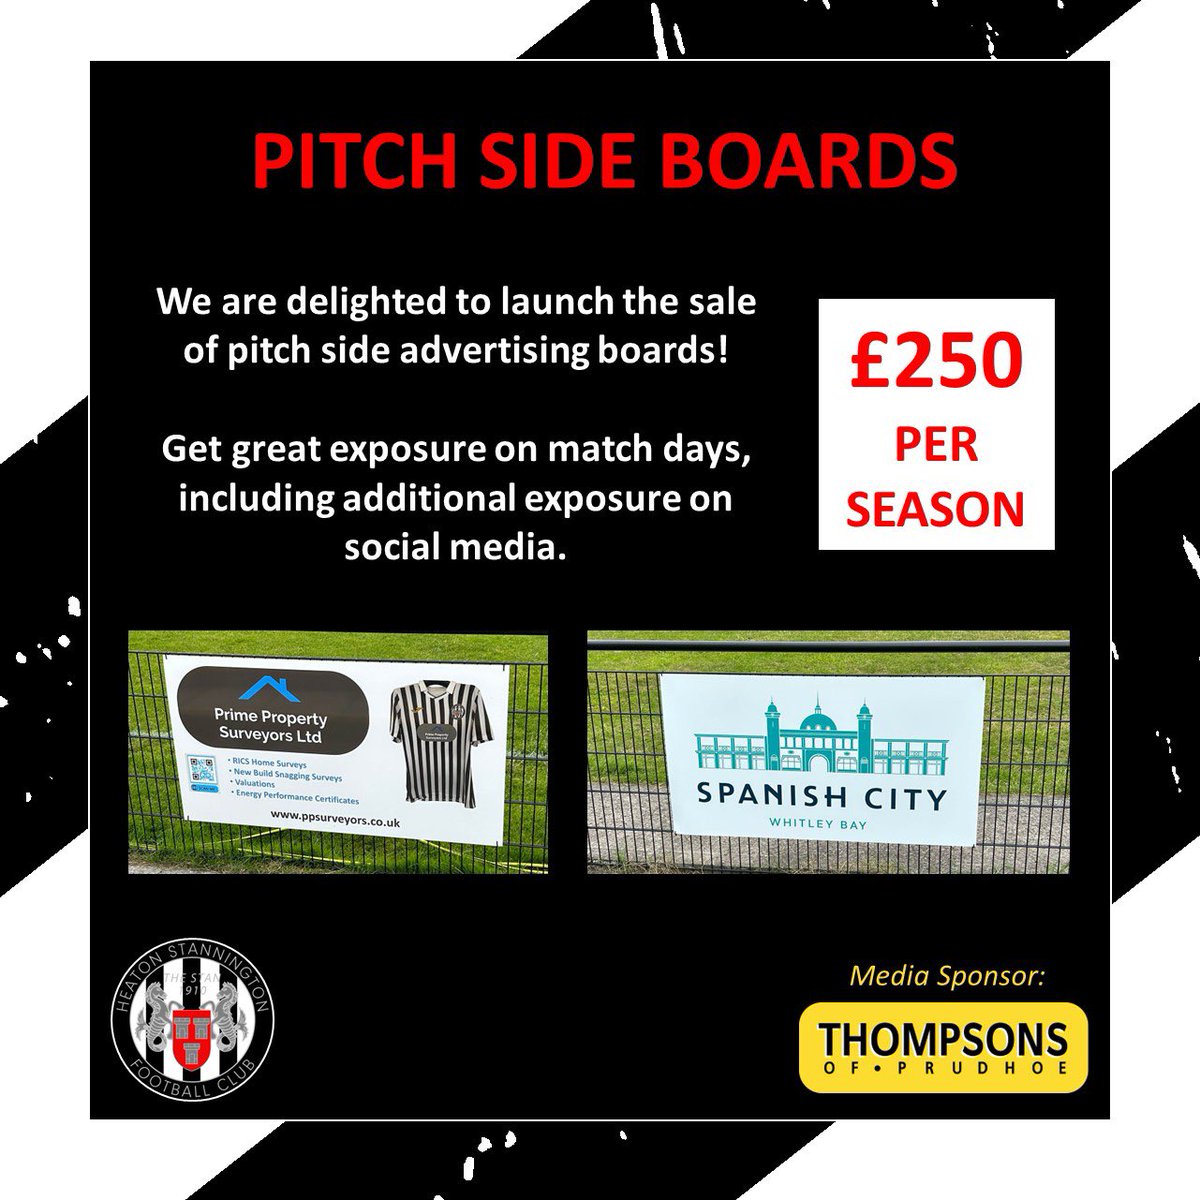 PITCH SIDE BOARDS We are now launching the sale of pitch side boards on our brand new fence at Grounsell Park. A board gets you amazing exposure on match days and via media platforms. Great value for money for just £250 per season all in! DM or email heatonstan@gmail.com